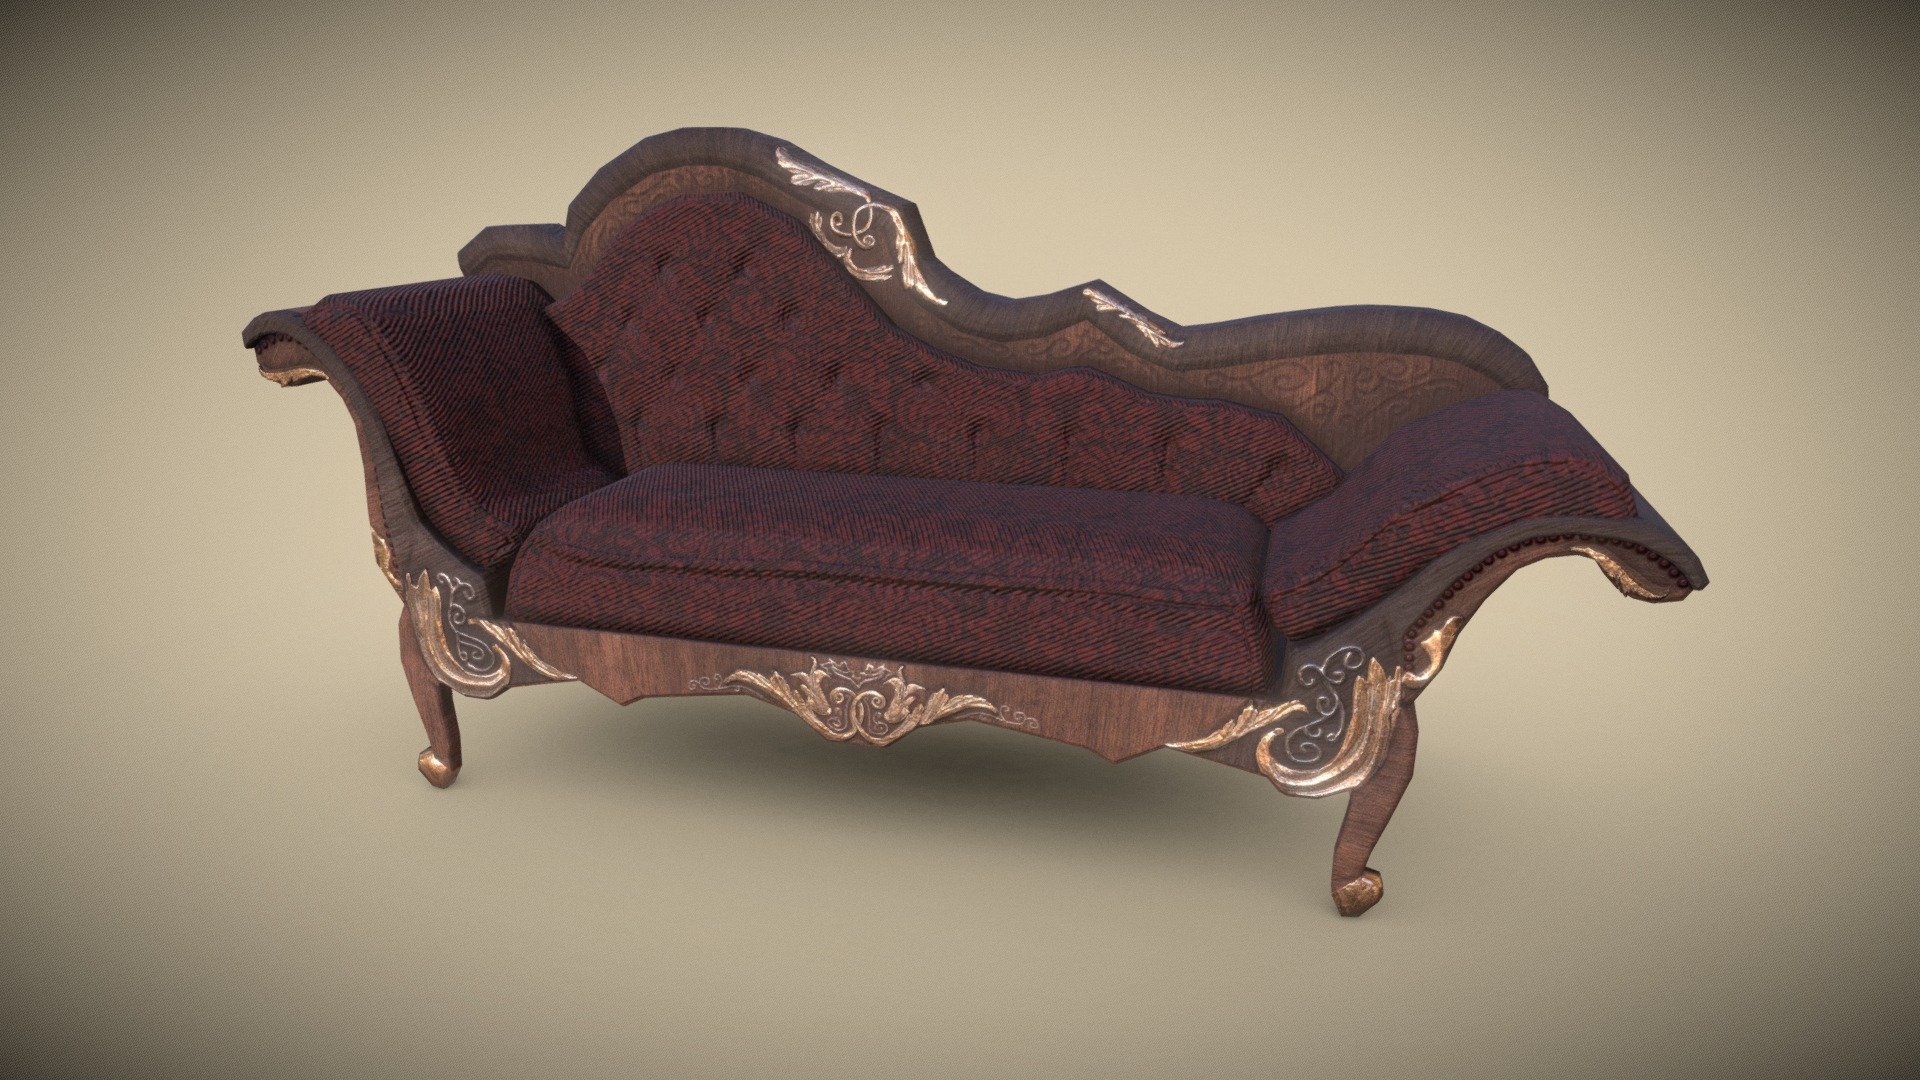 Victorian Lounge Sofa Asset Created for a University Project.
Feel Free to download this asset and use it in your projects! :) - Victorian Lounge Sofa - Download Free 3D model by Jamie McFarlane (@jamiemcfarlane) 3d model